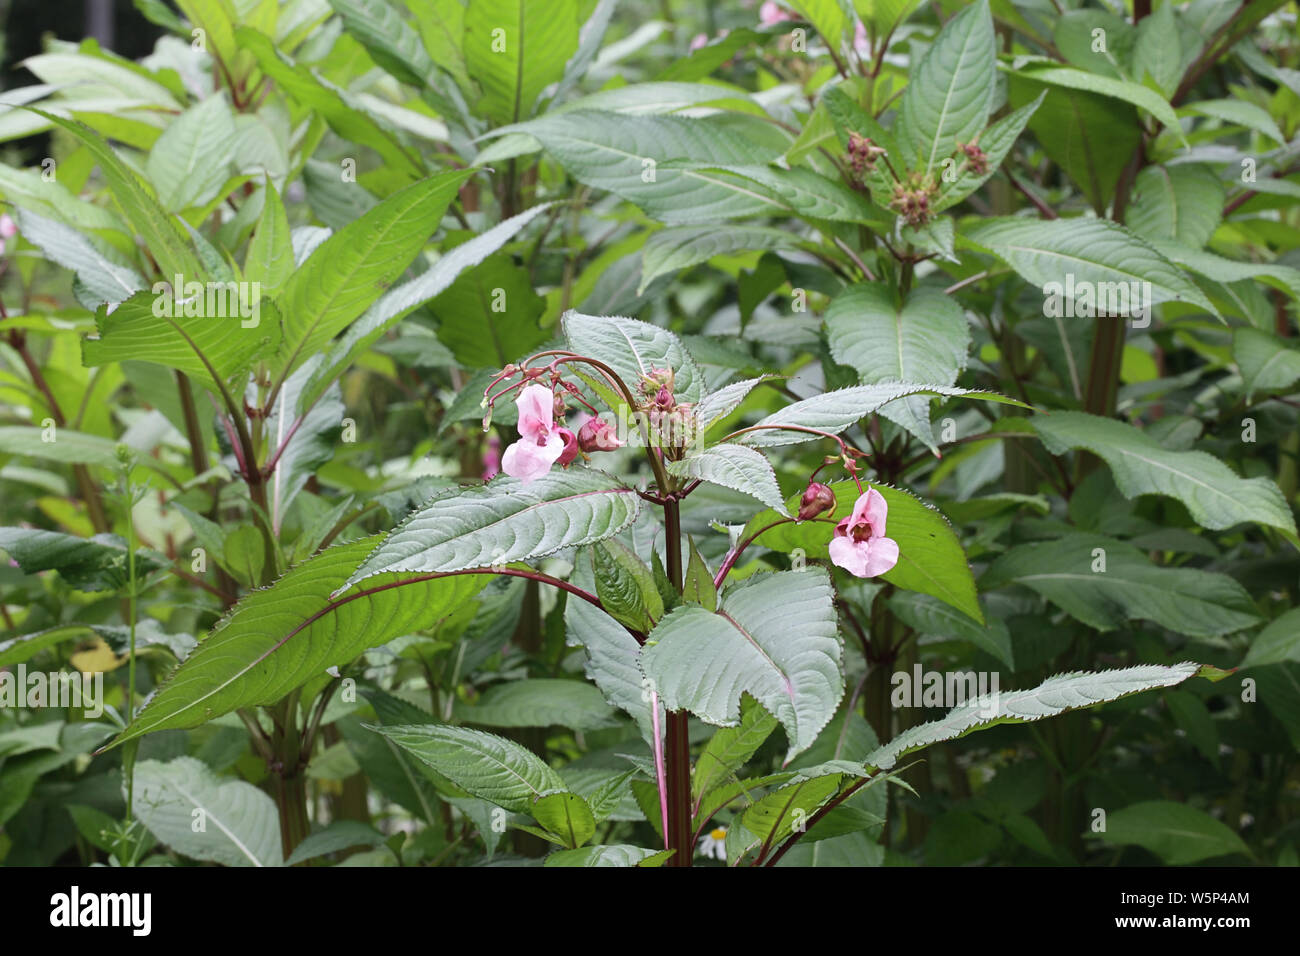 Impatiens glandulifera, known as Himalayan Balsam, a very invasive harmful plant Stock Photo